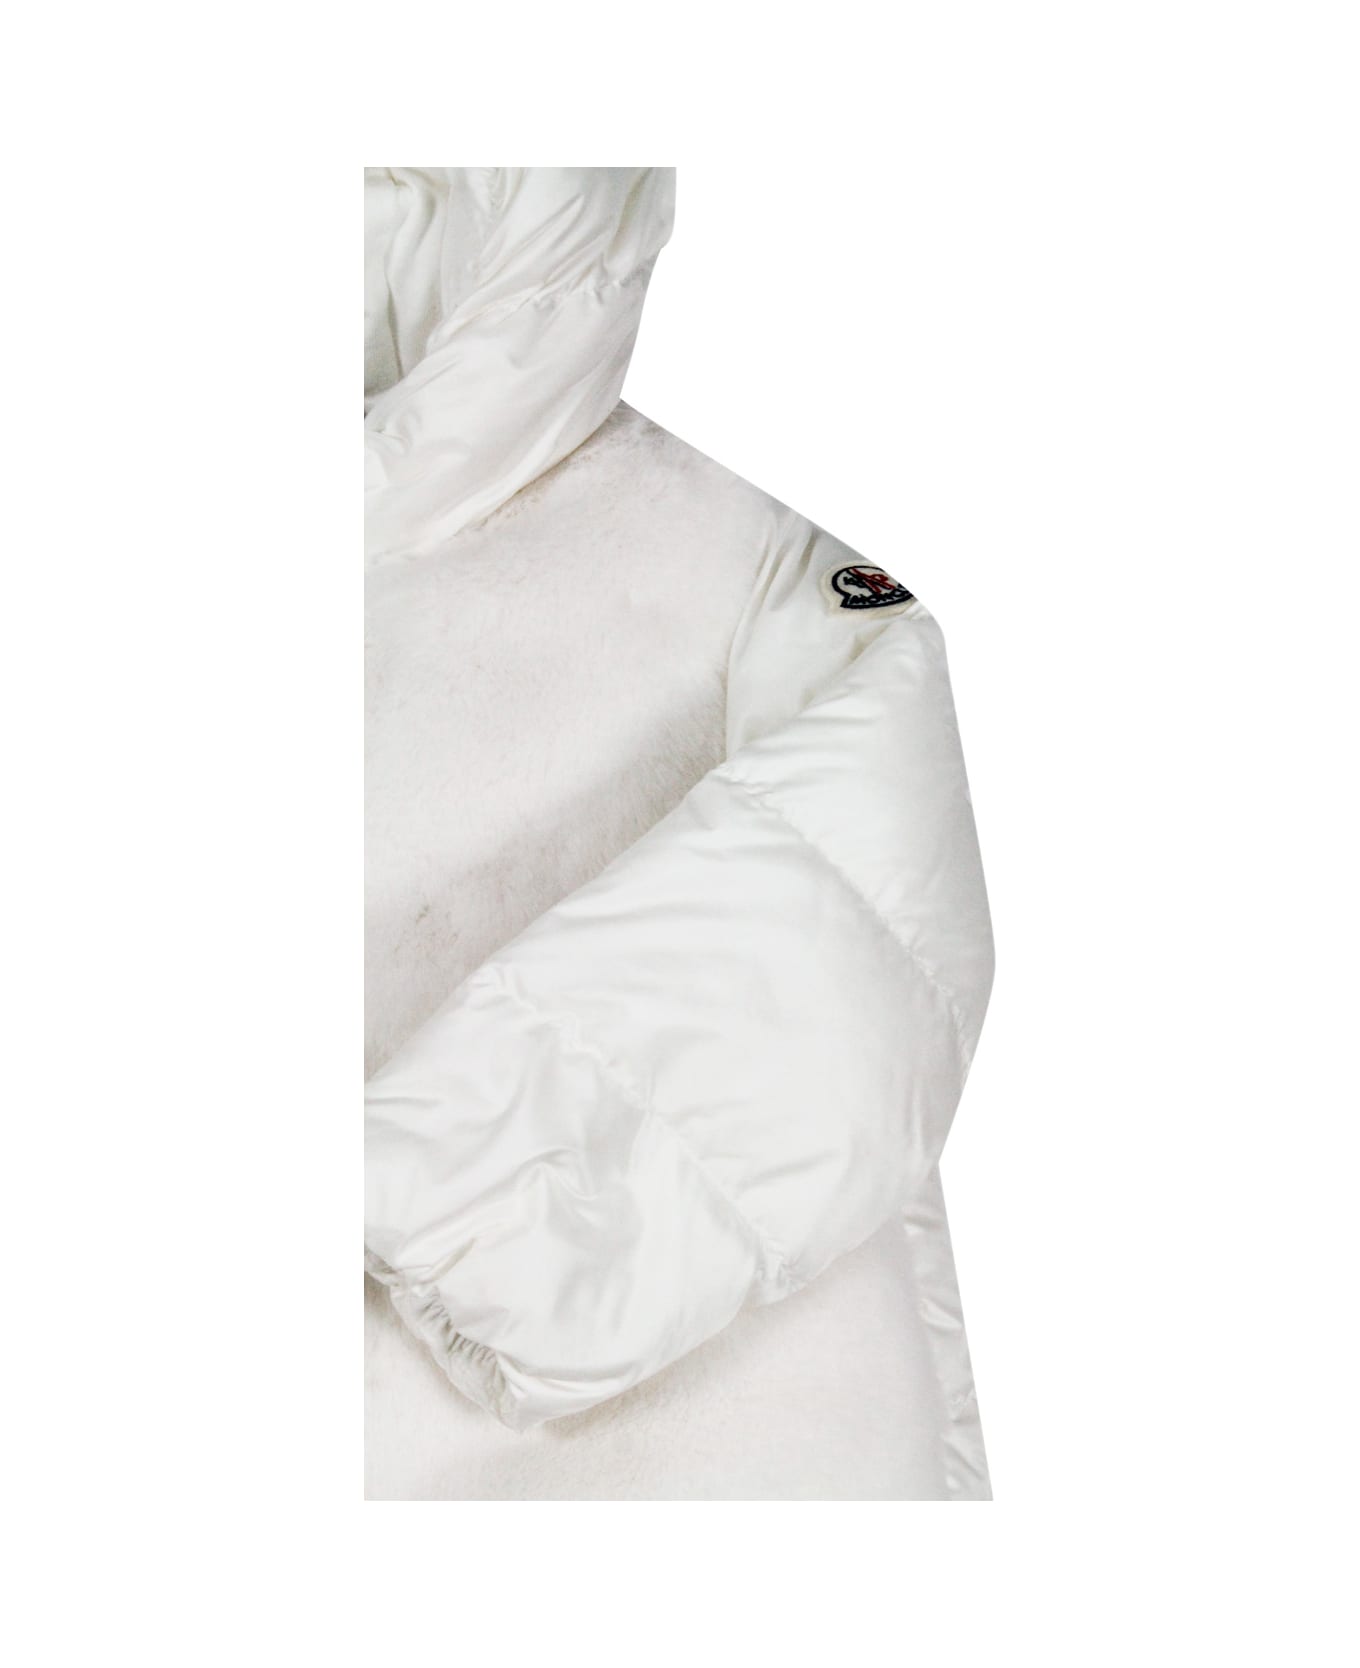 Moncler Natas Down Jacket With Hood And Logo On The Sleeve In Real Goose Down With Front In Soft Teddy Bear - White コート＆ジャケット